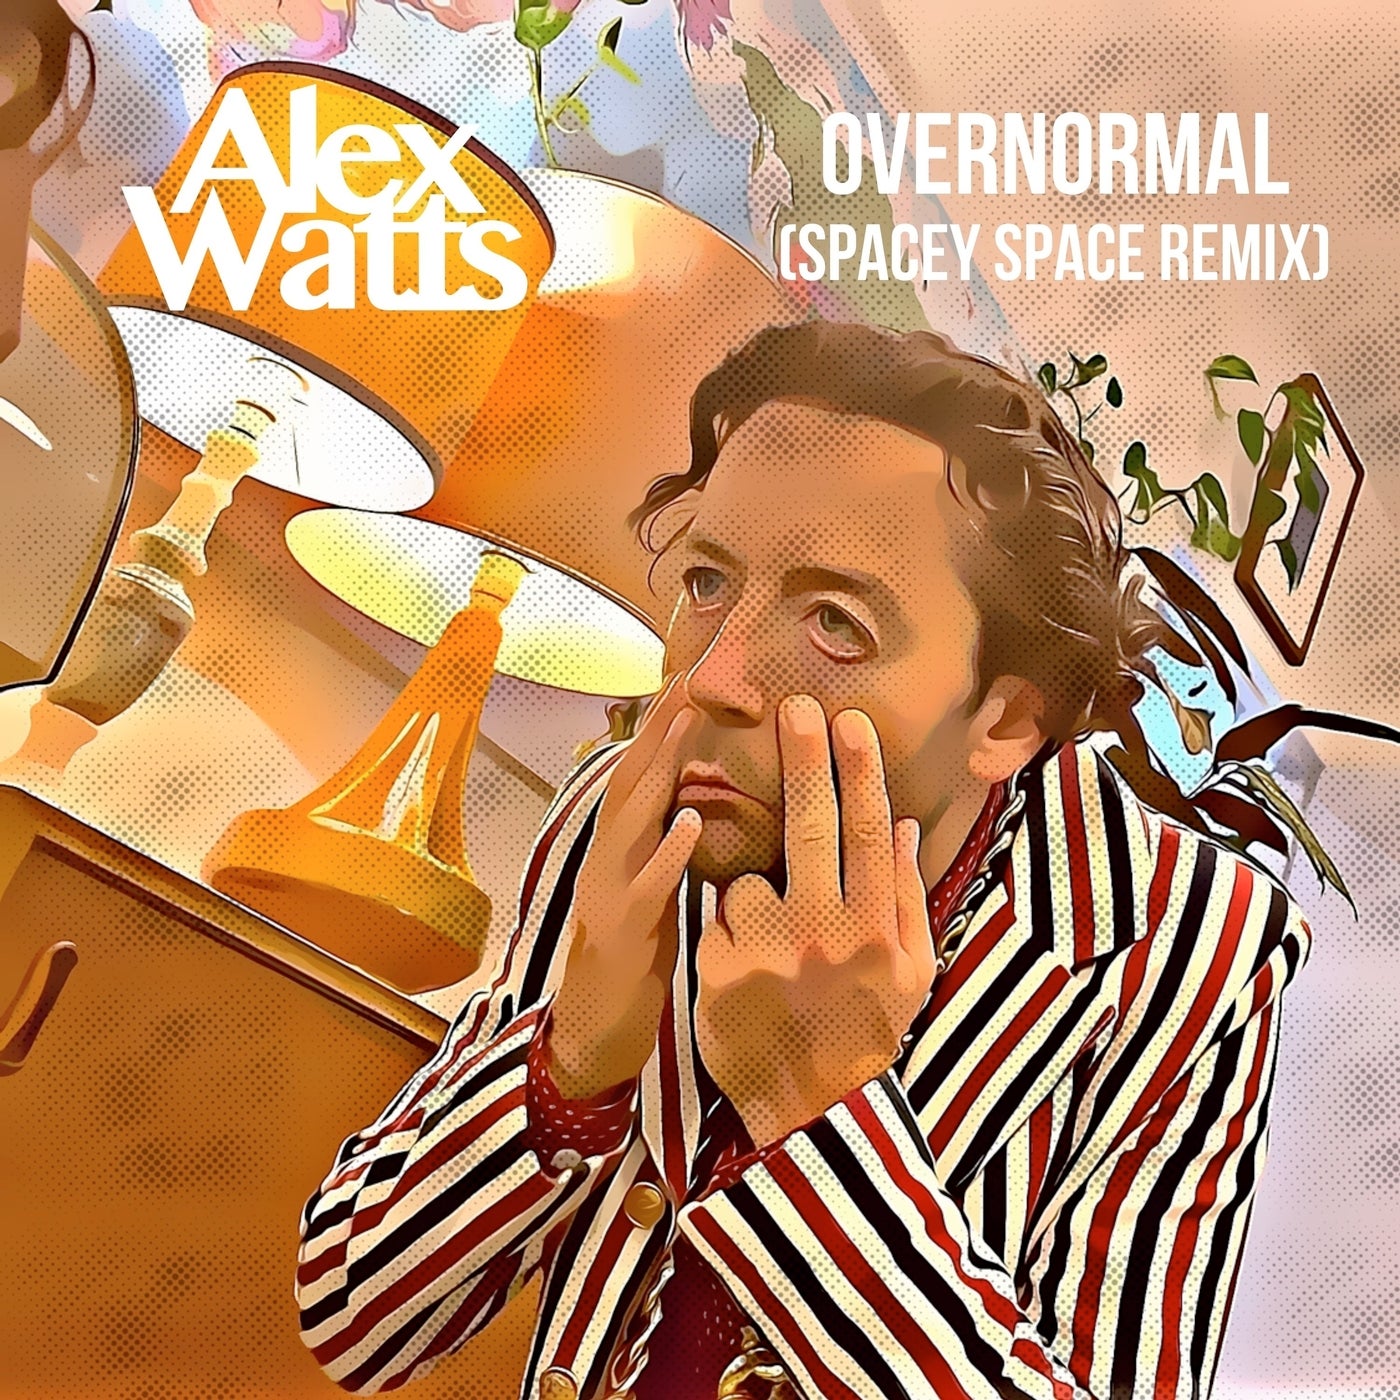 Overnormal (Spacey Space Remix)